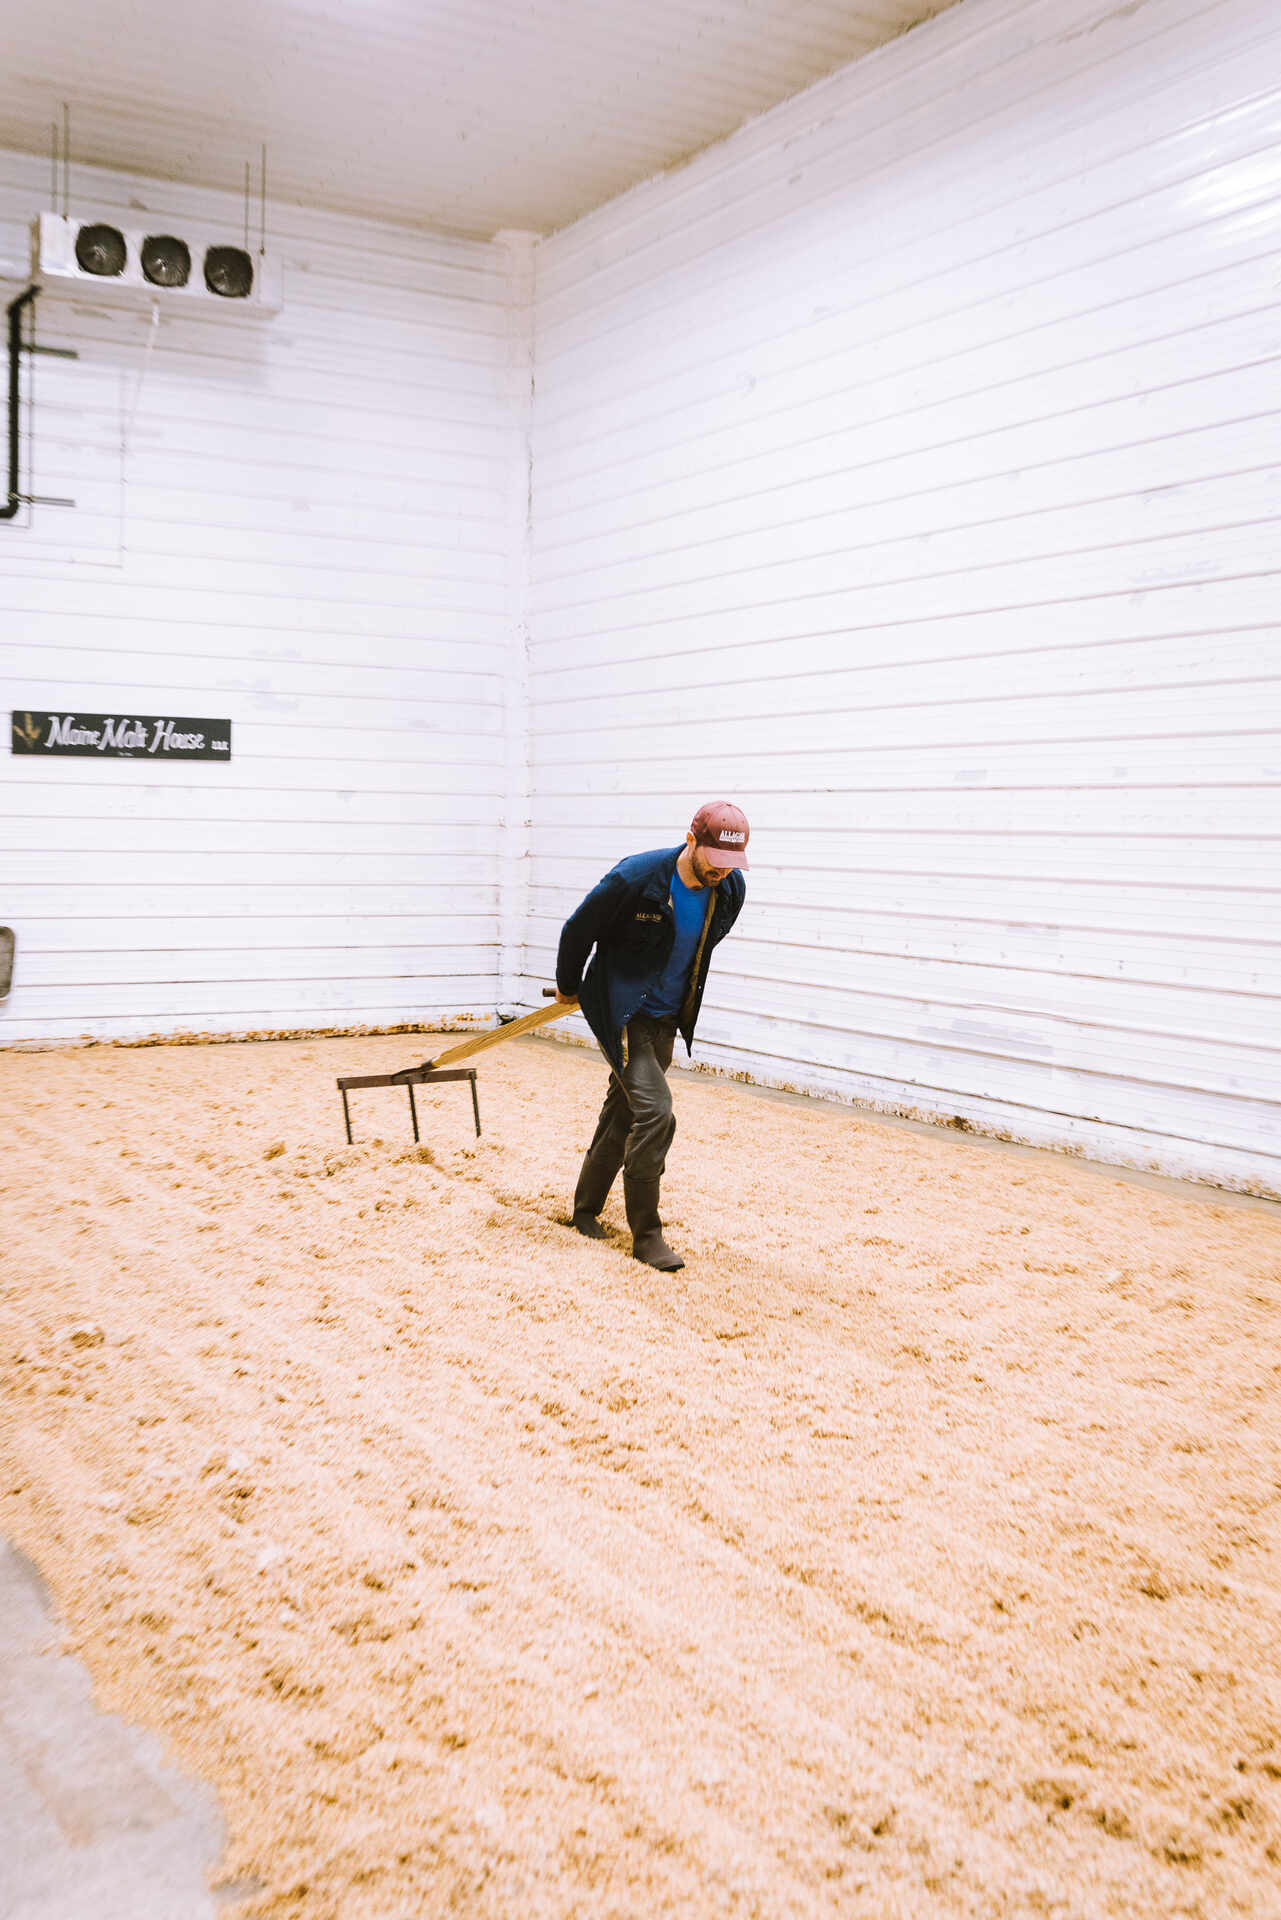 A person pulling a rake through a bed of malted barley.